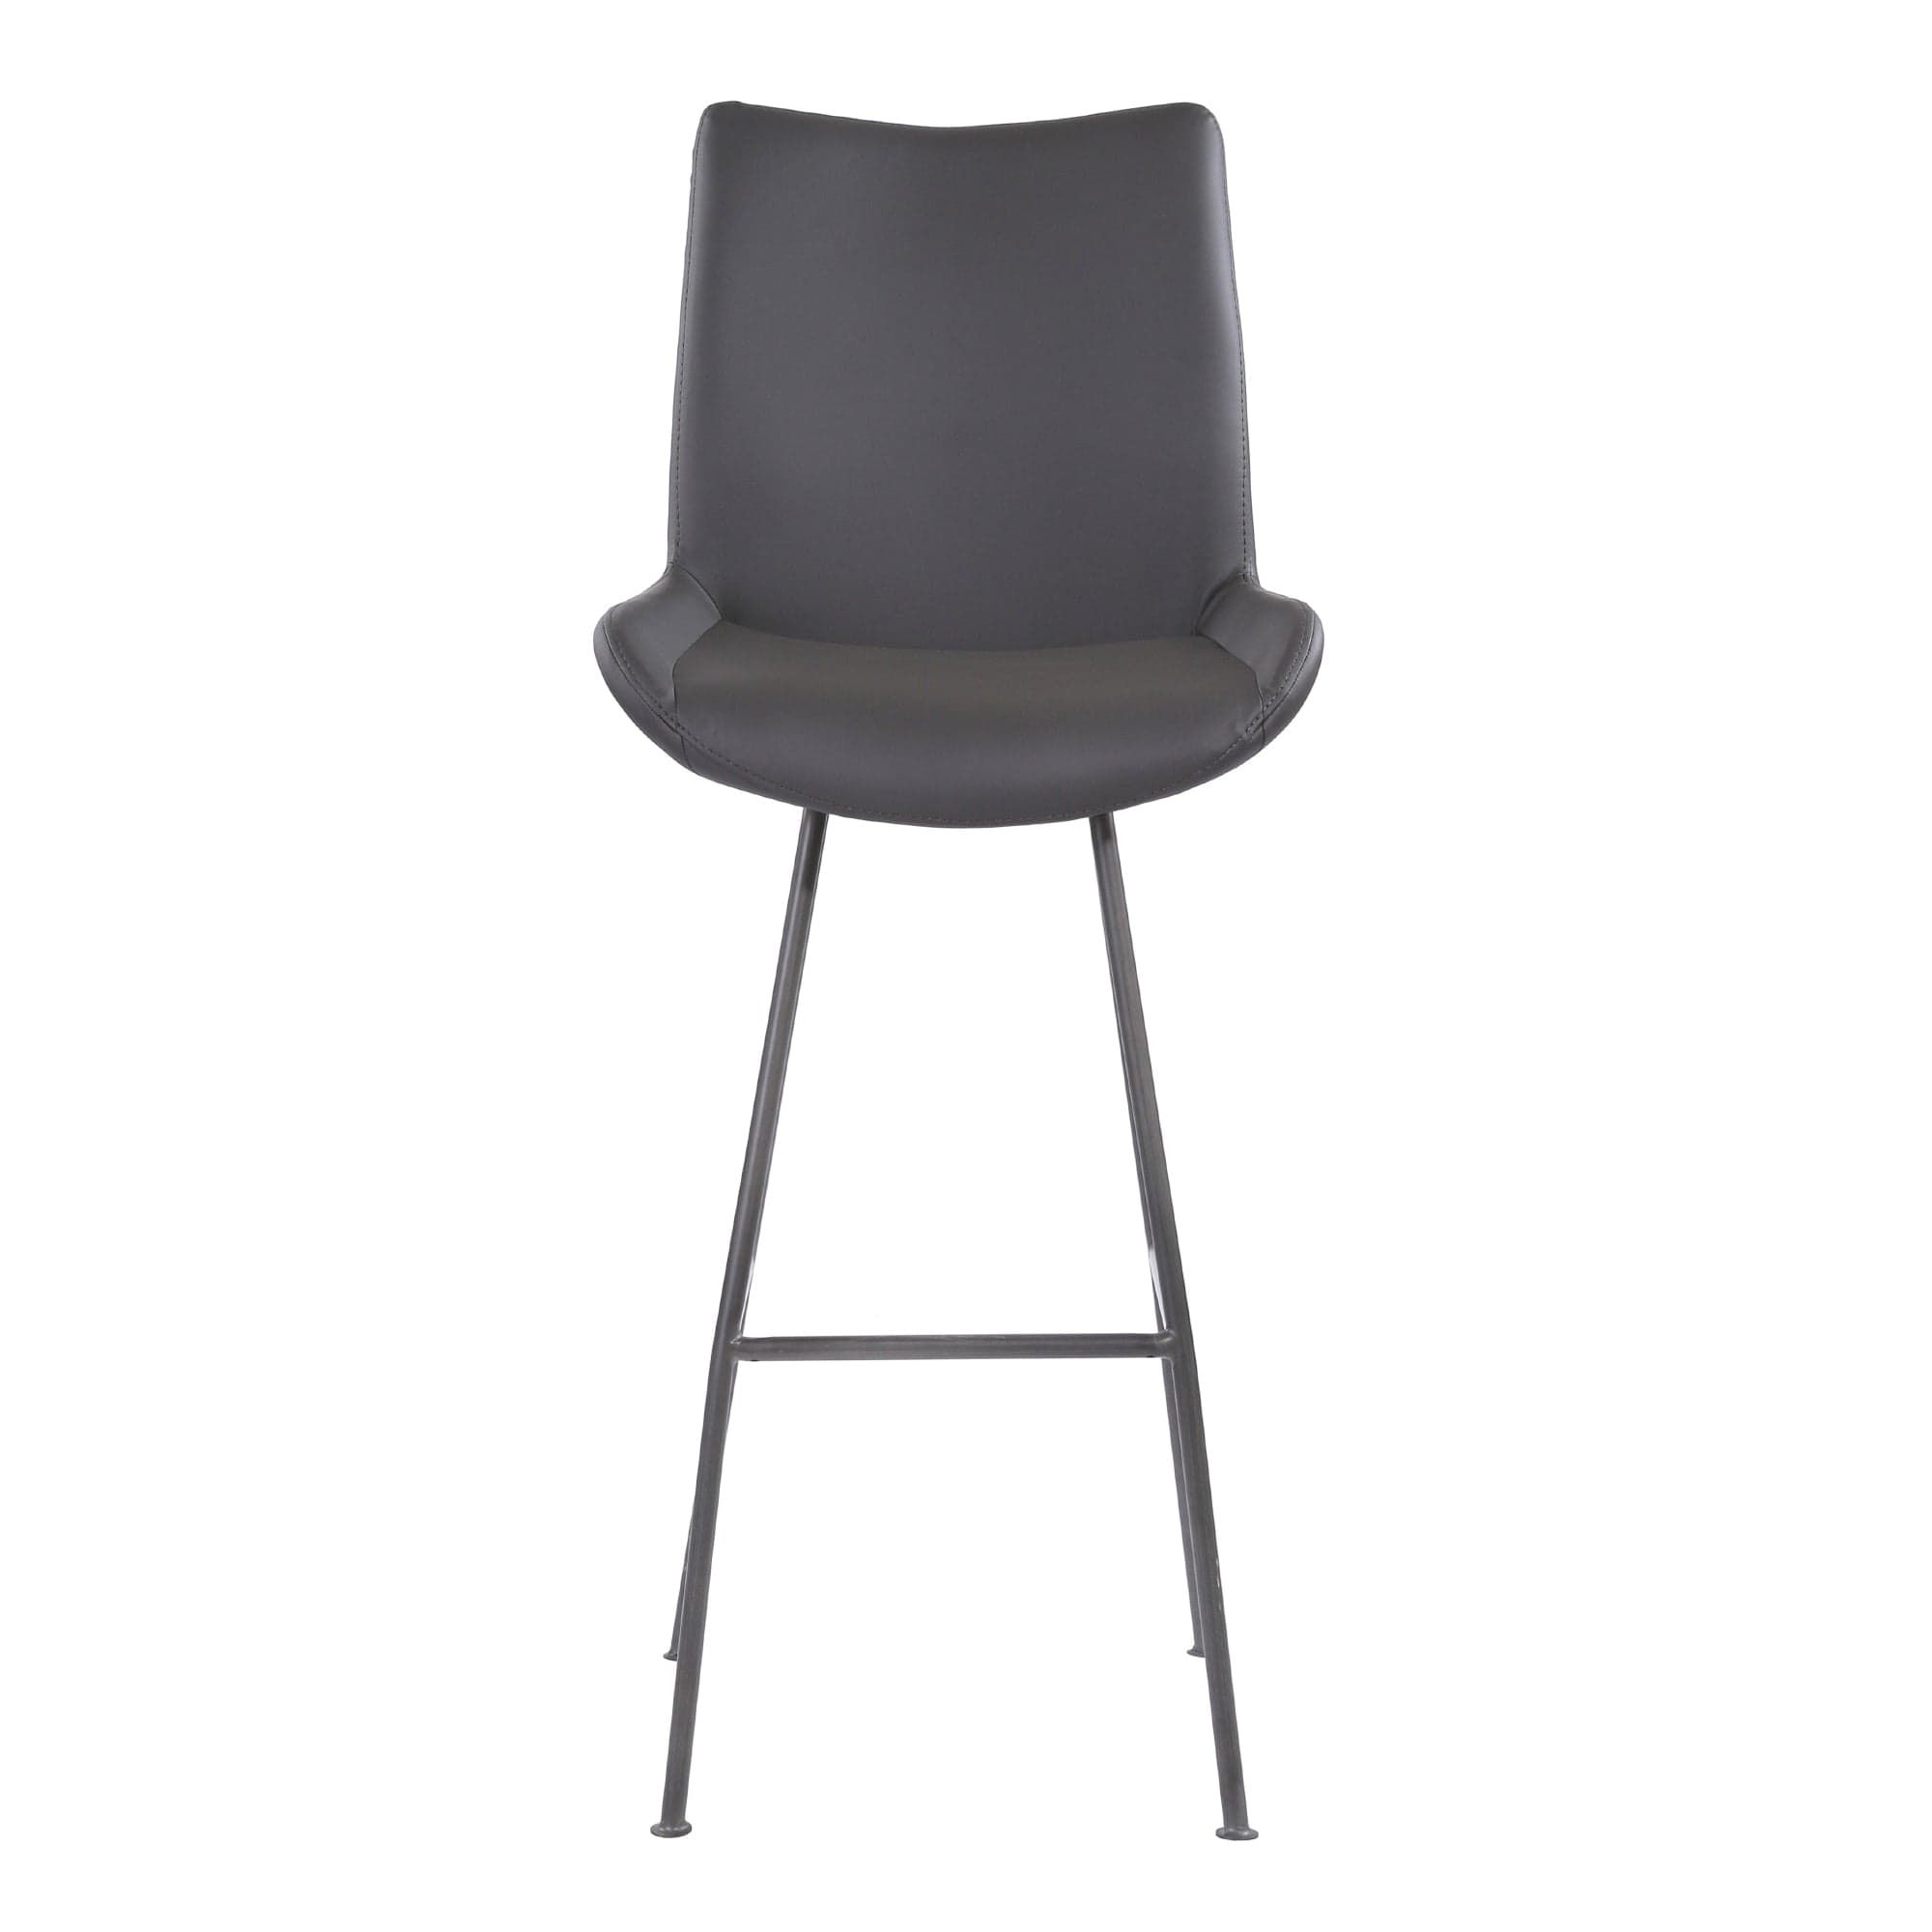 Armen Living Barstool Armen Living | Coronado Contemporary 30" Bar Height Barstool in Brushed Gray Powder Coated Finish and Gray Faux Leather | LCCDBAGR30